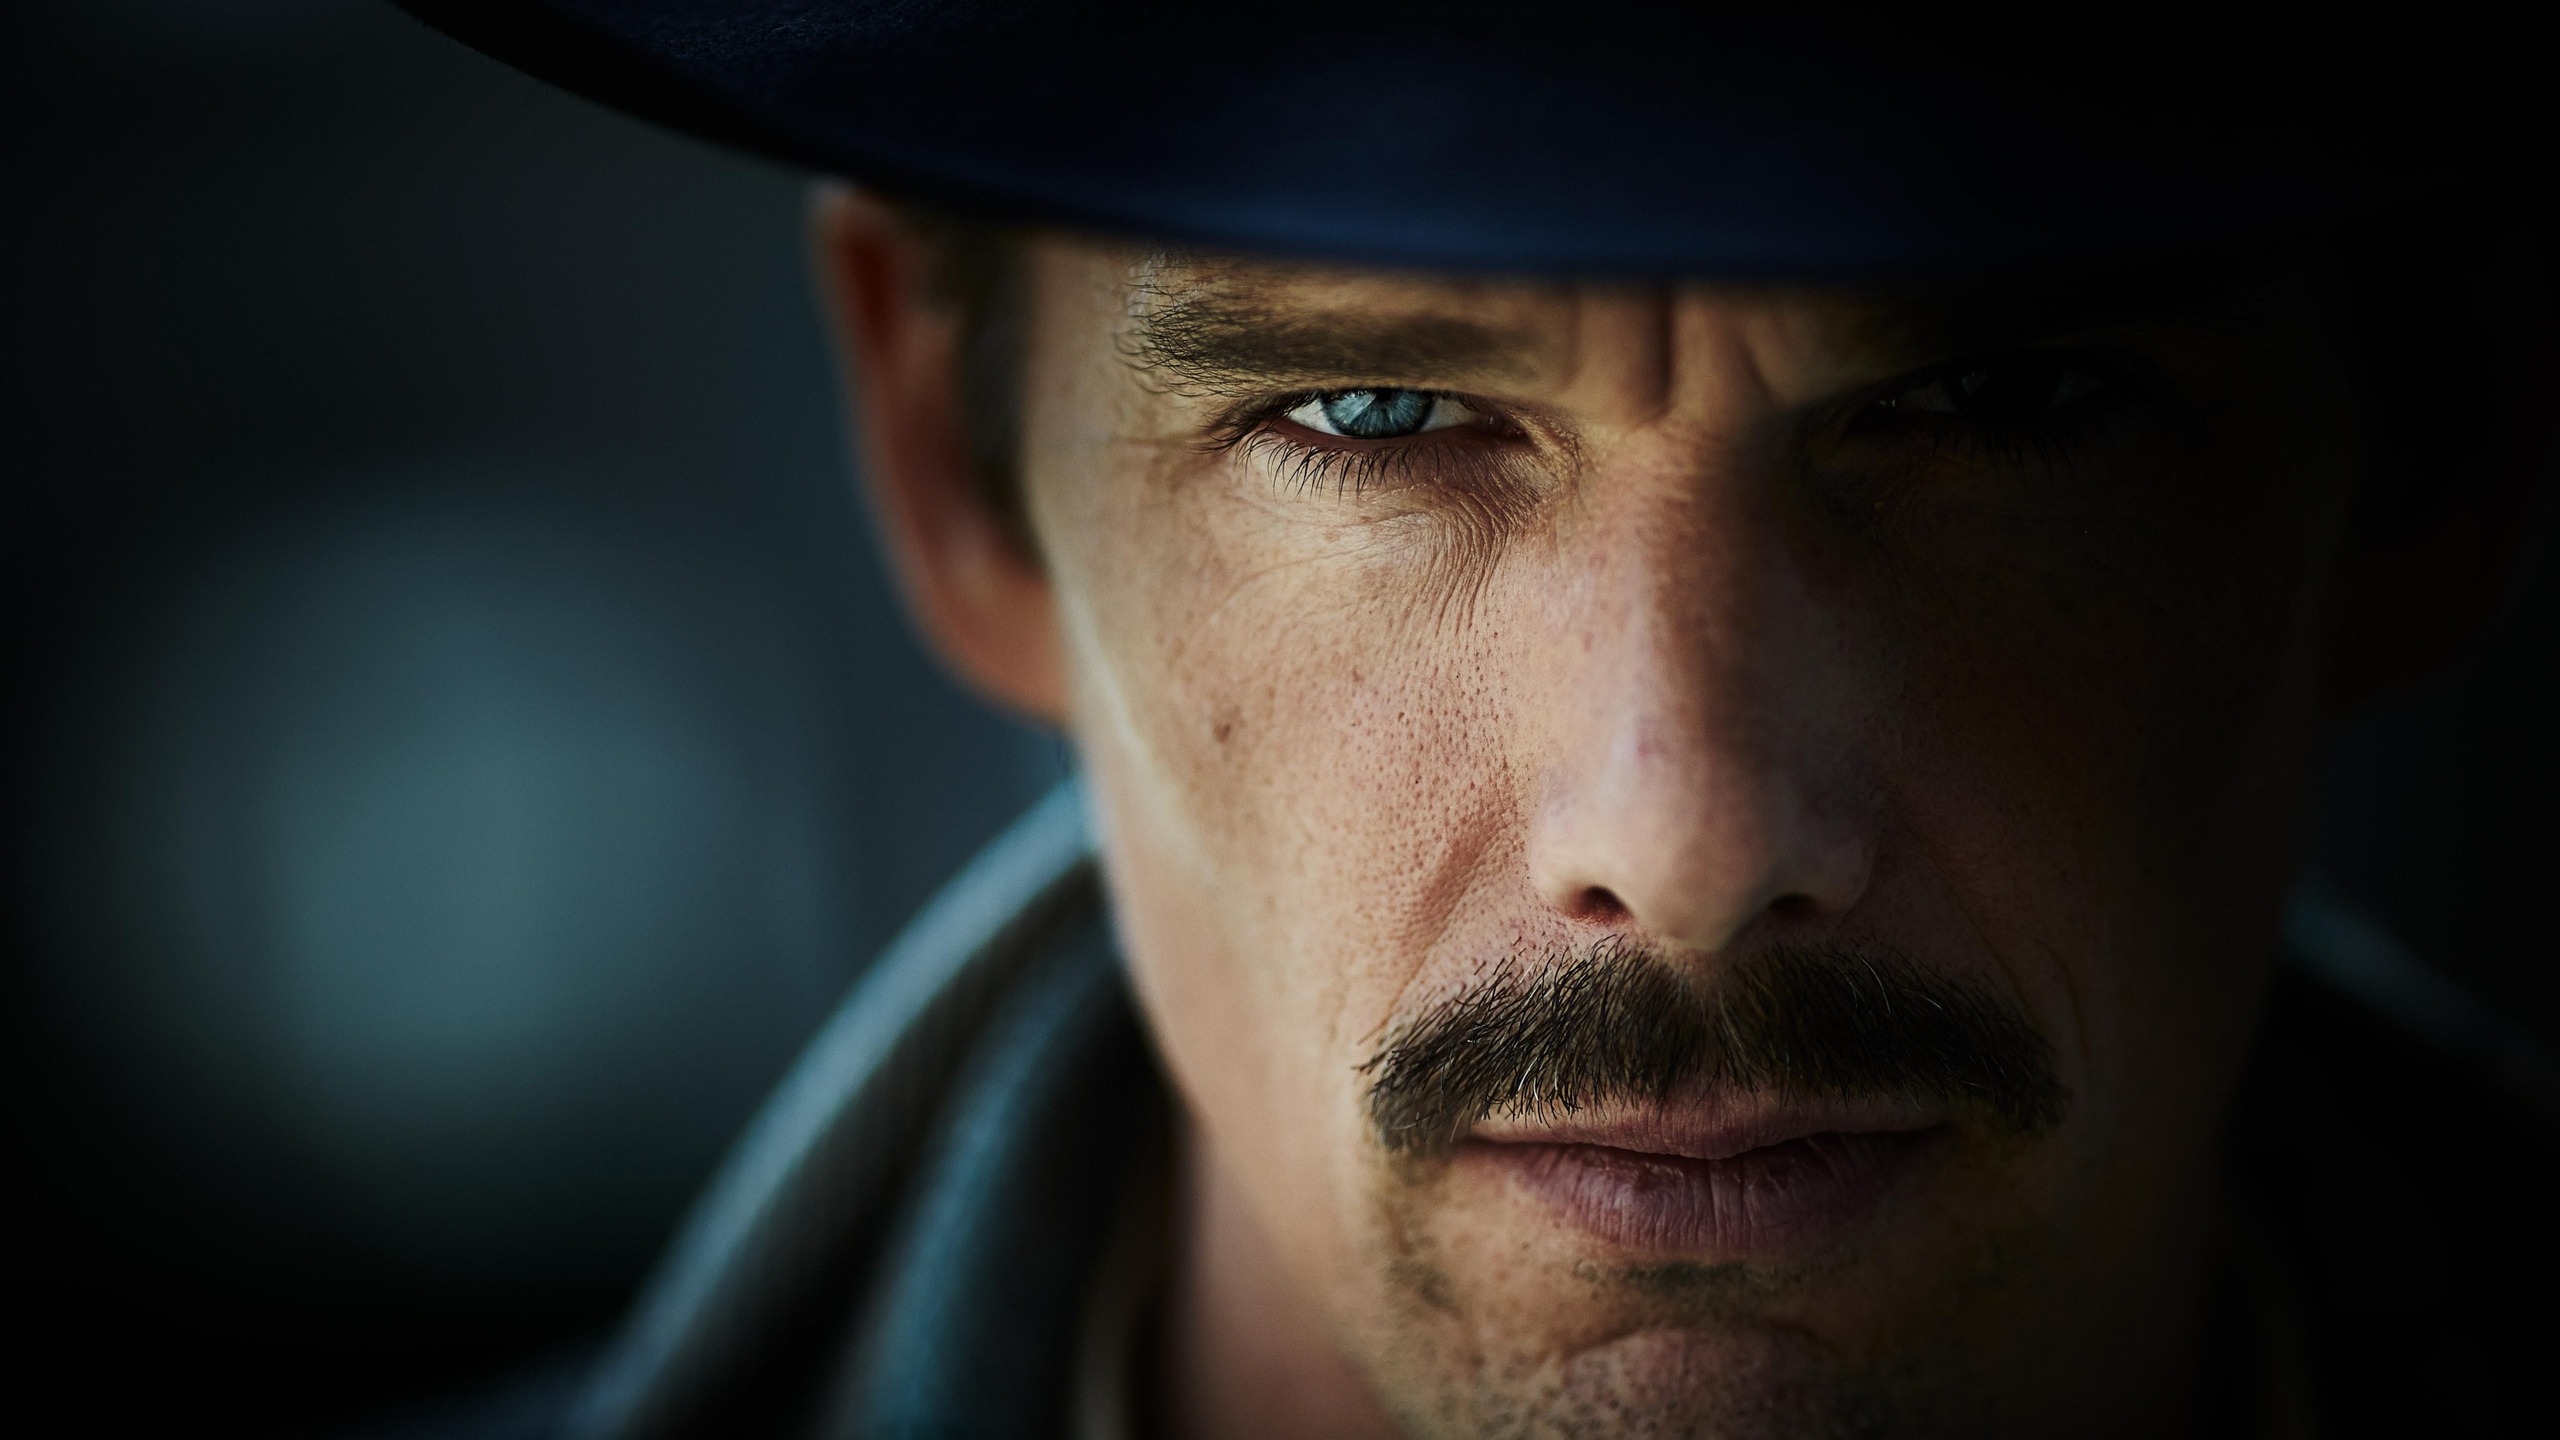 Ethan Hawke Look for 2560x1440 HDTV resolution